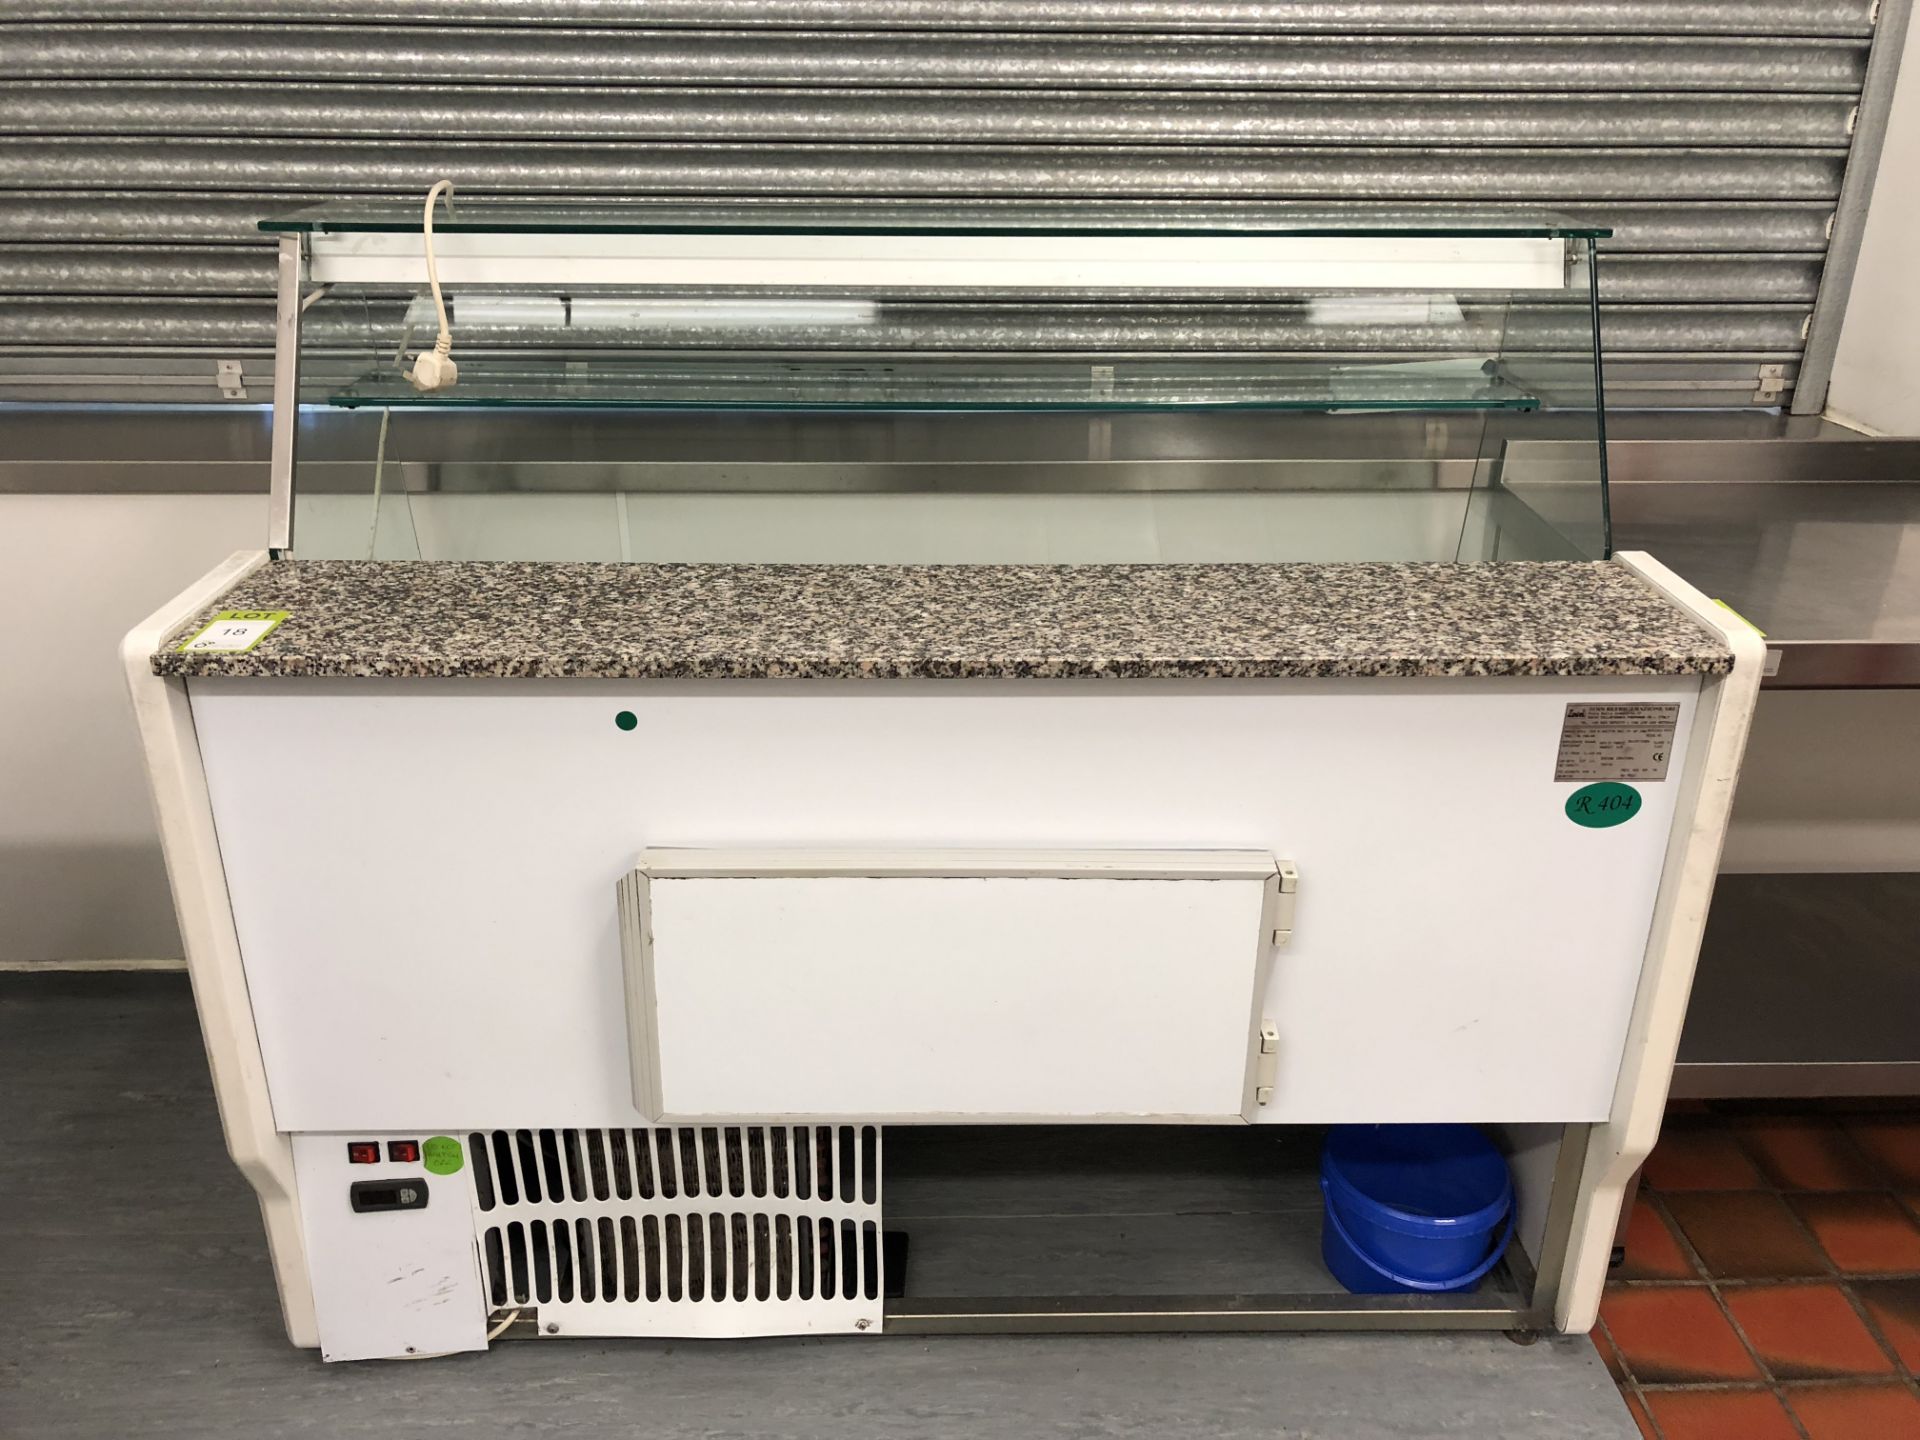 Zoin HL-15 B-VA Serve over Counter Chiller, 1500mm x 790mm, 240volts (located in Kitchen)